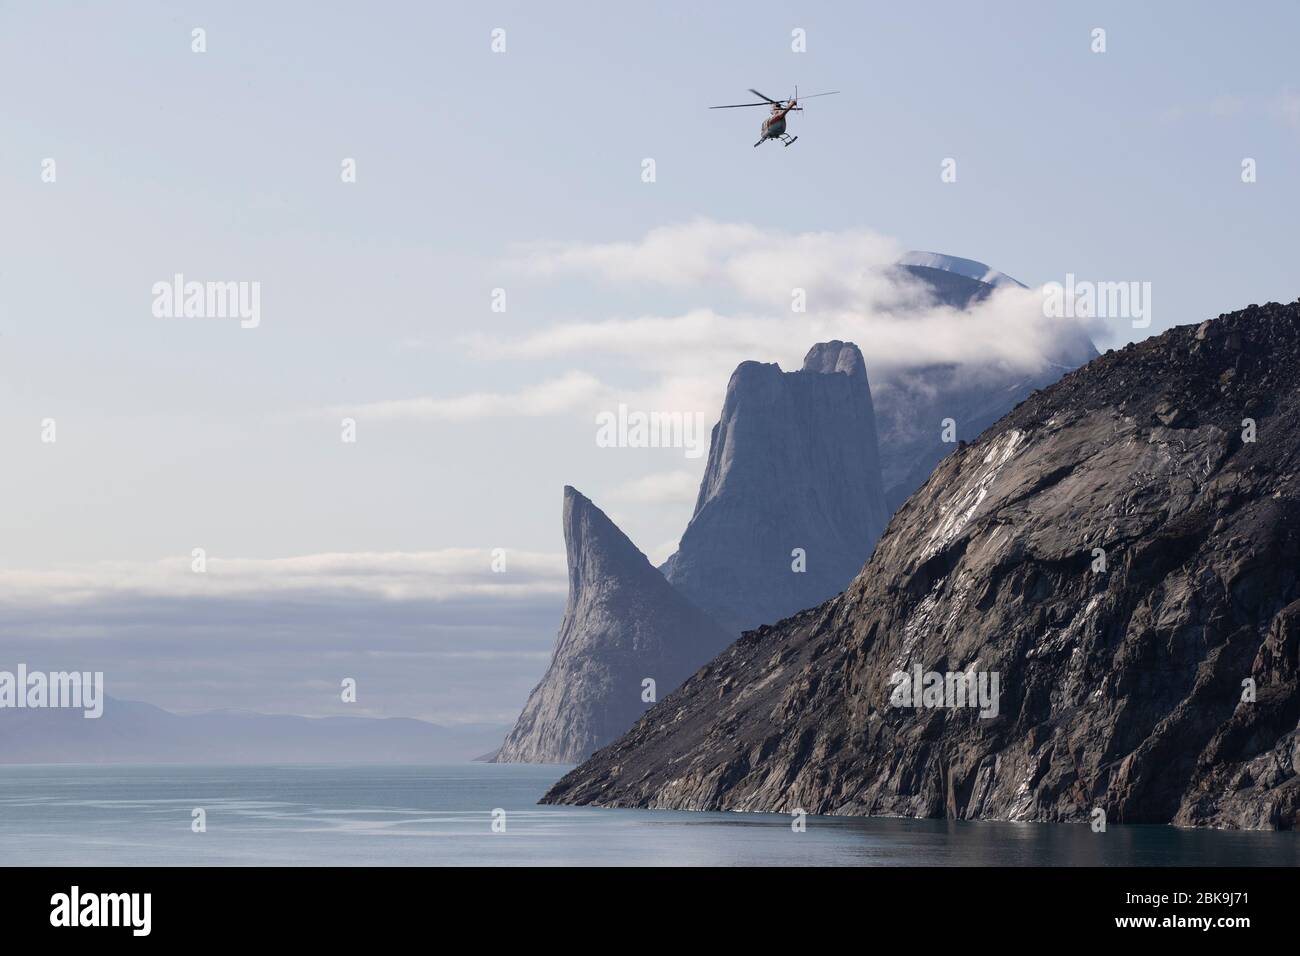 Helicopter and dramatic landscape, Sam Ford Fjord, Canada Stock Photo